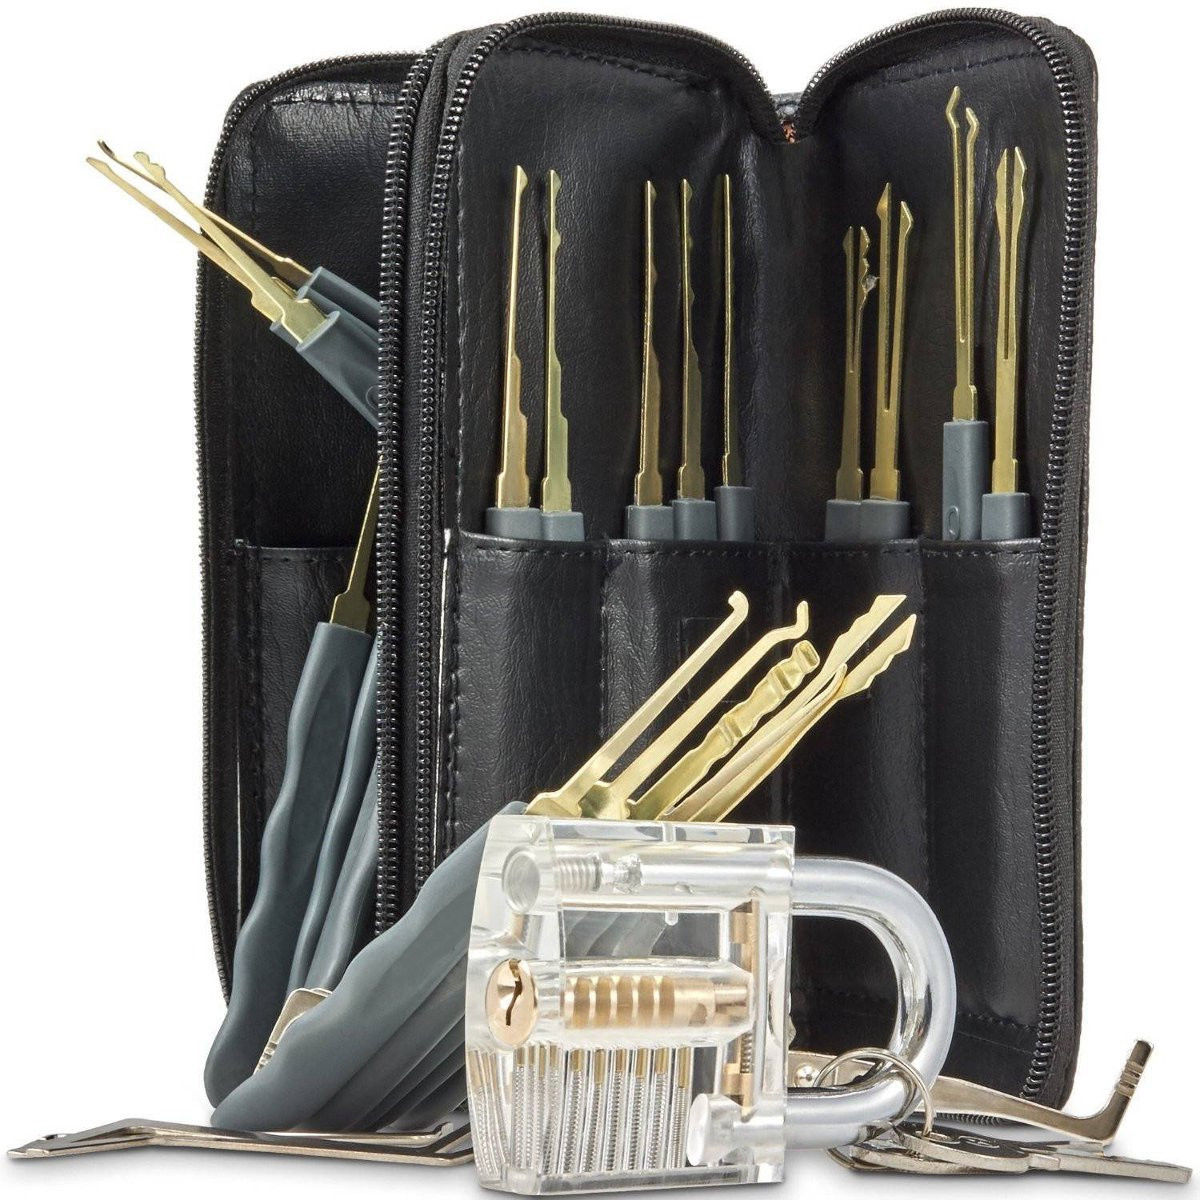 Lock Pick Set, 25pcs Lock Picking Tools with Clear Practice and Training Locks for Lockpicking, Extractor Tool for Beginner and Pro Locksmiths